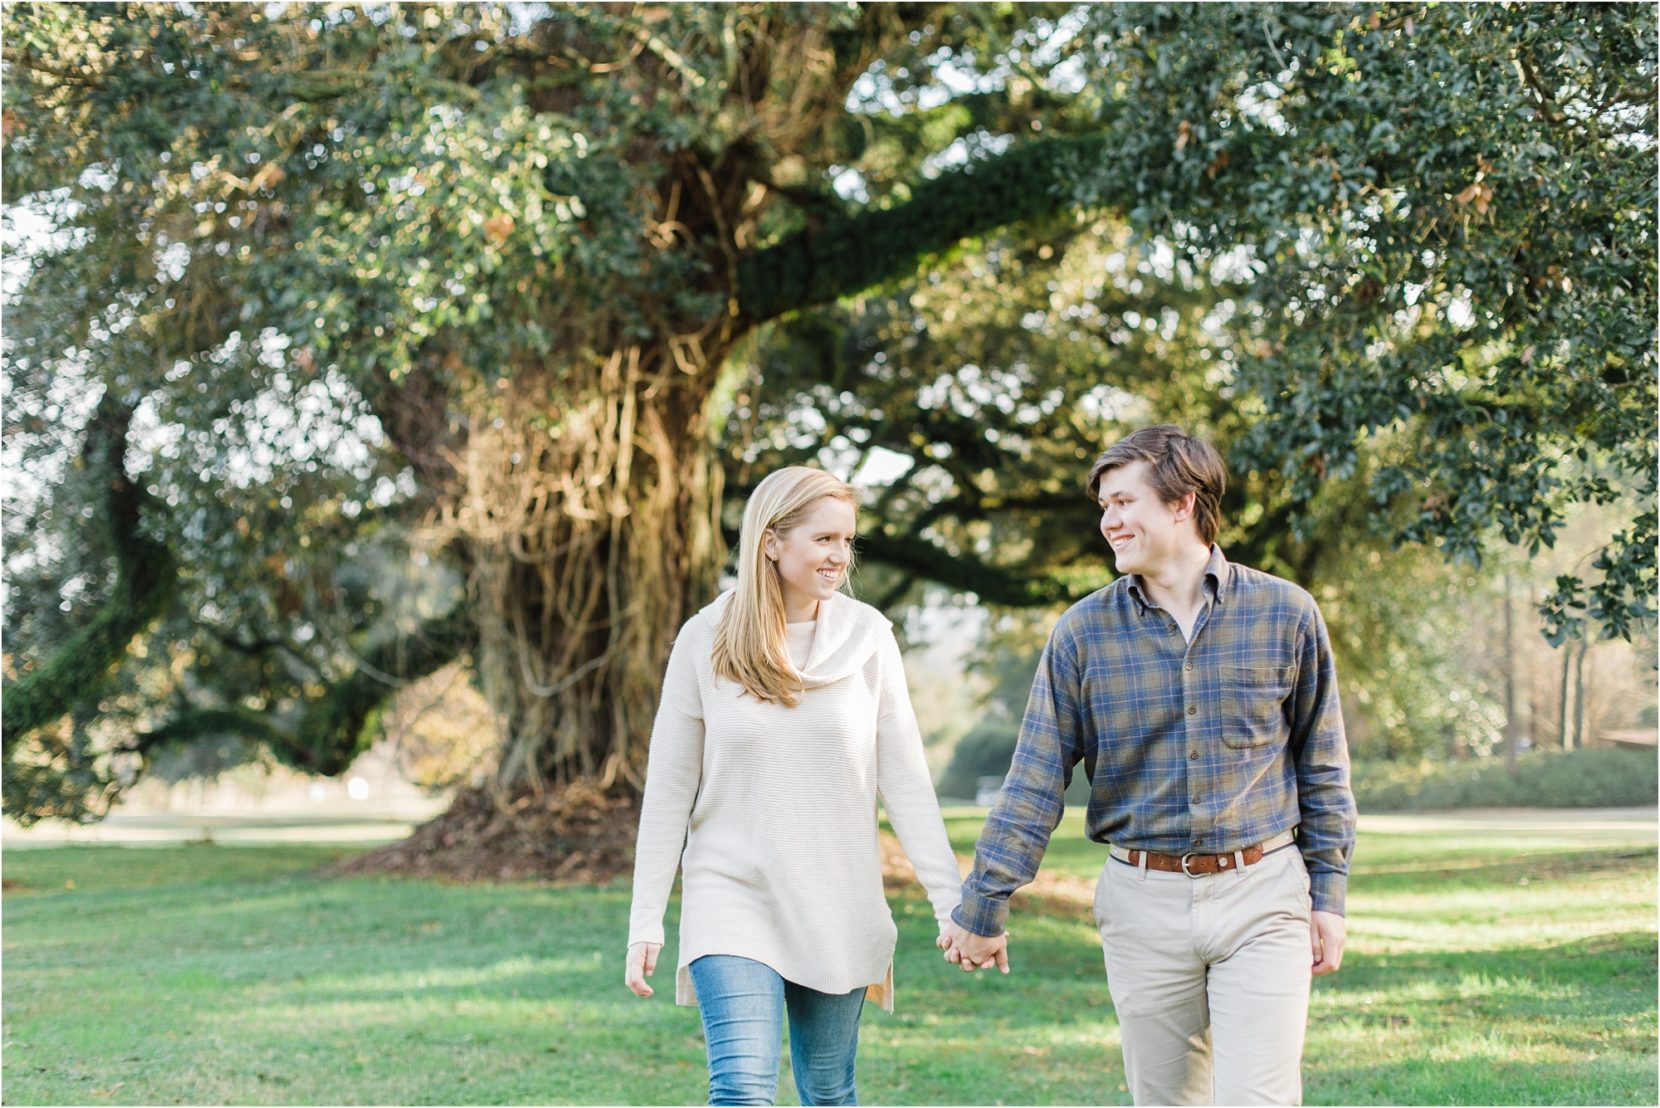 mobile alabama springhill college engagement photographer jennie tewell photography 0006